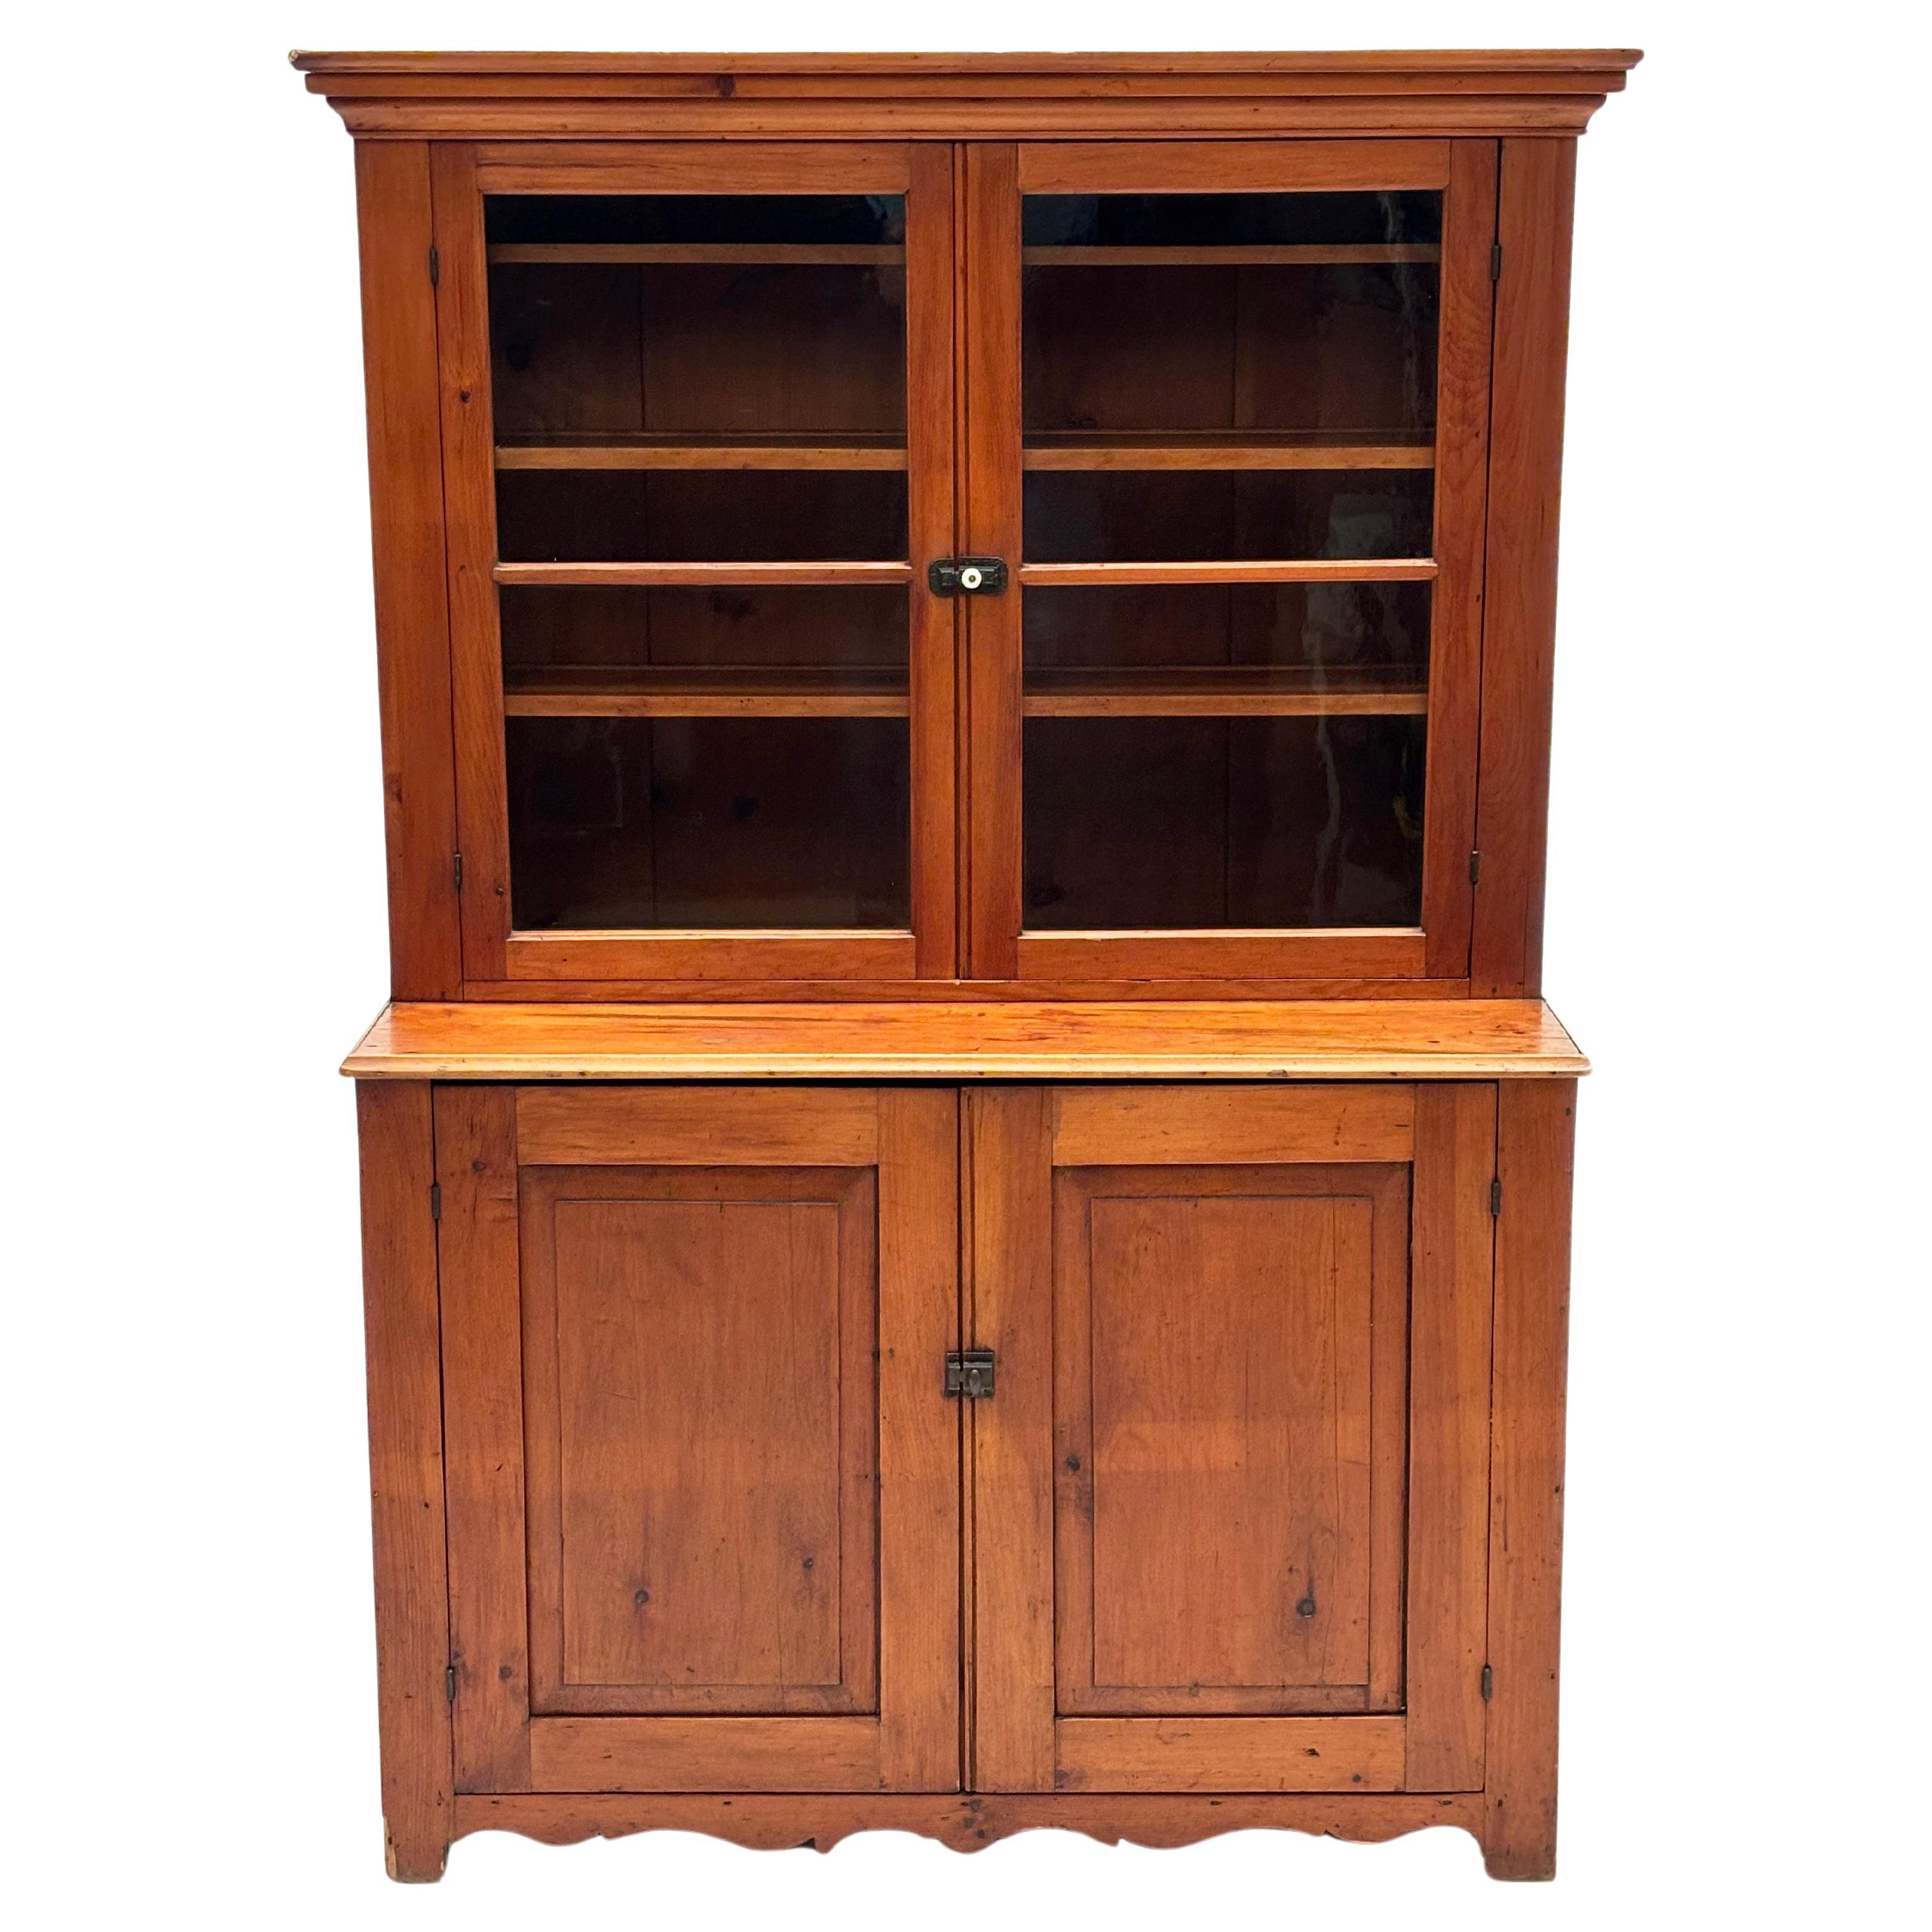 Early 1800’s Pennsylvania Dutch Pine Country Cupboard with Wavy Glass Doors For Sale